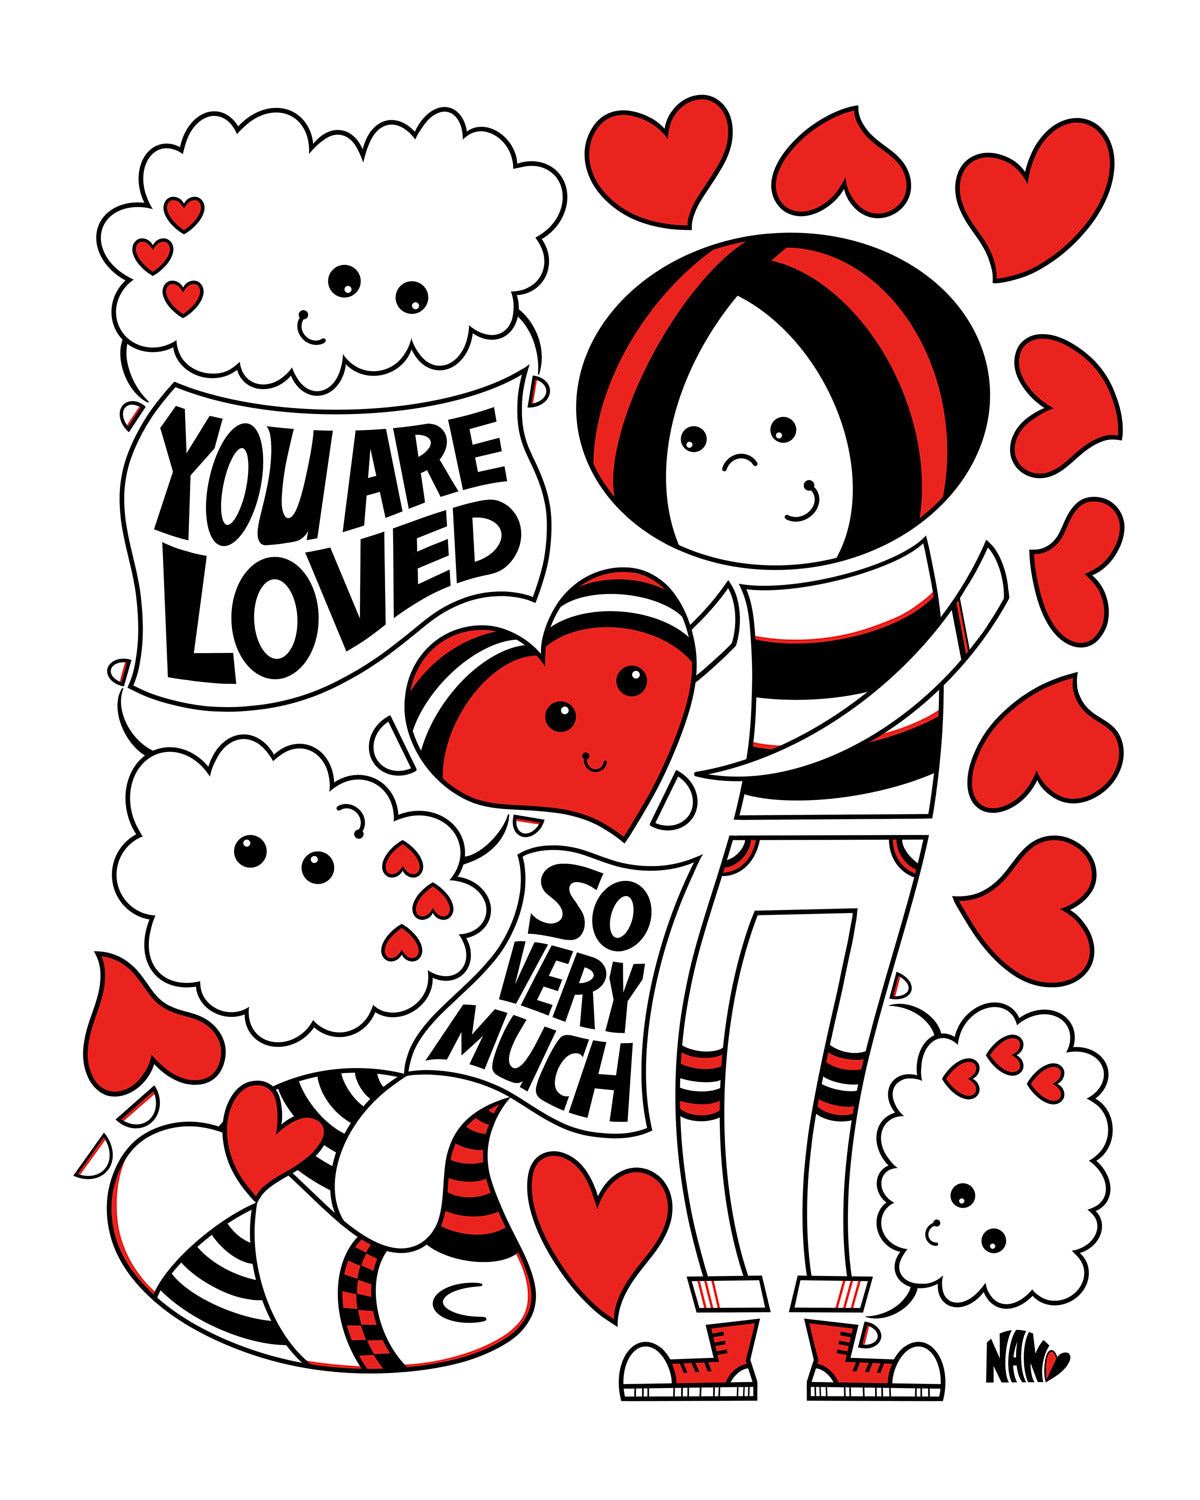 You Are Loved So Very Much - Print